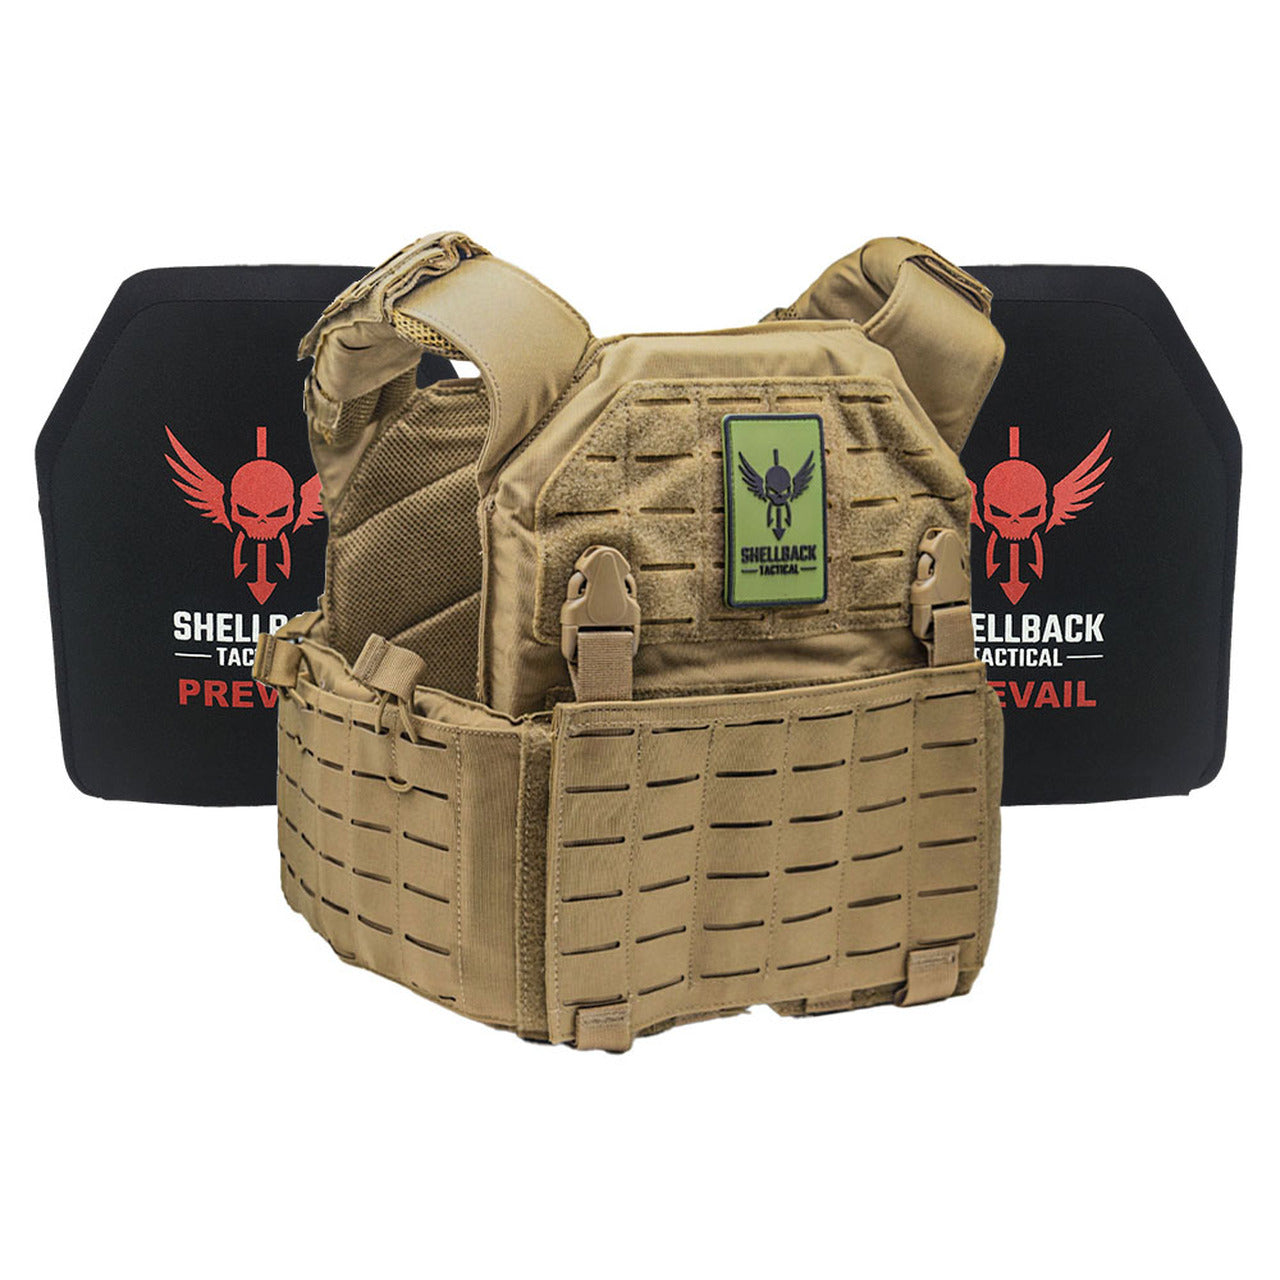 A Shellback Tactical Rampage 2.0 Active Shooter Kit with Level III Single Curve 10 x 12 Hard Armor plate carrier with a green and black logo.